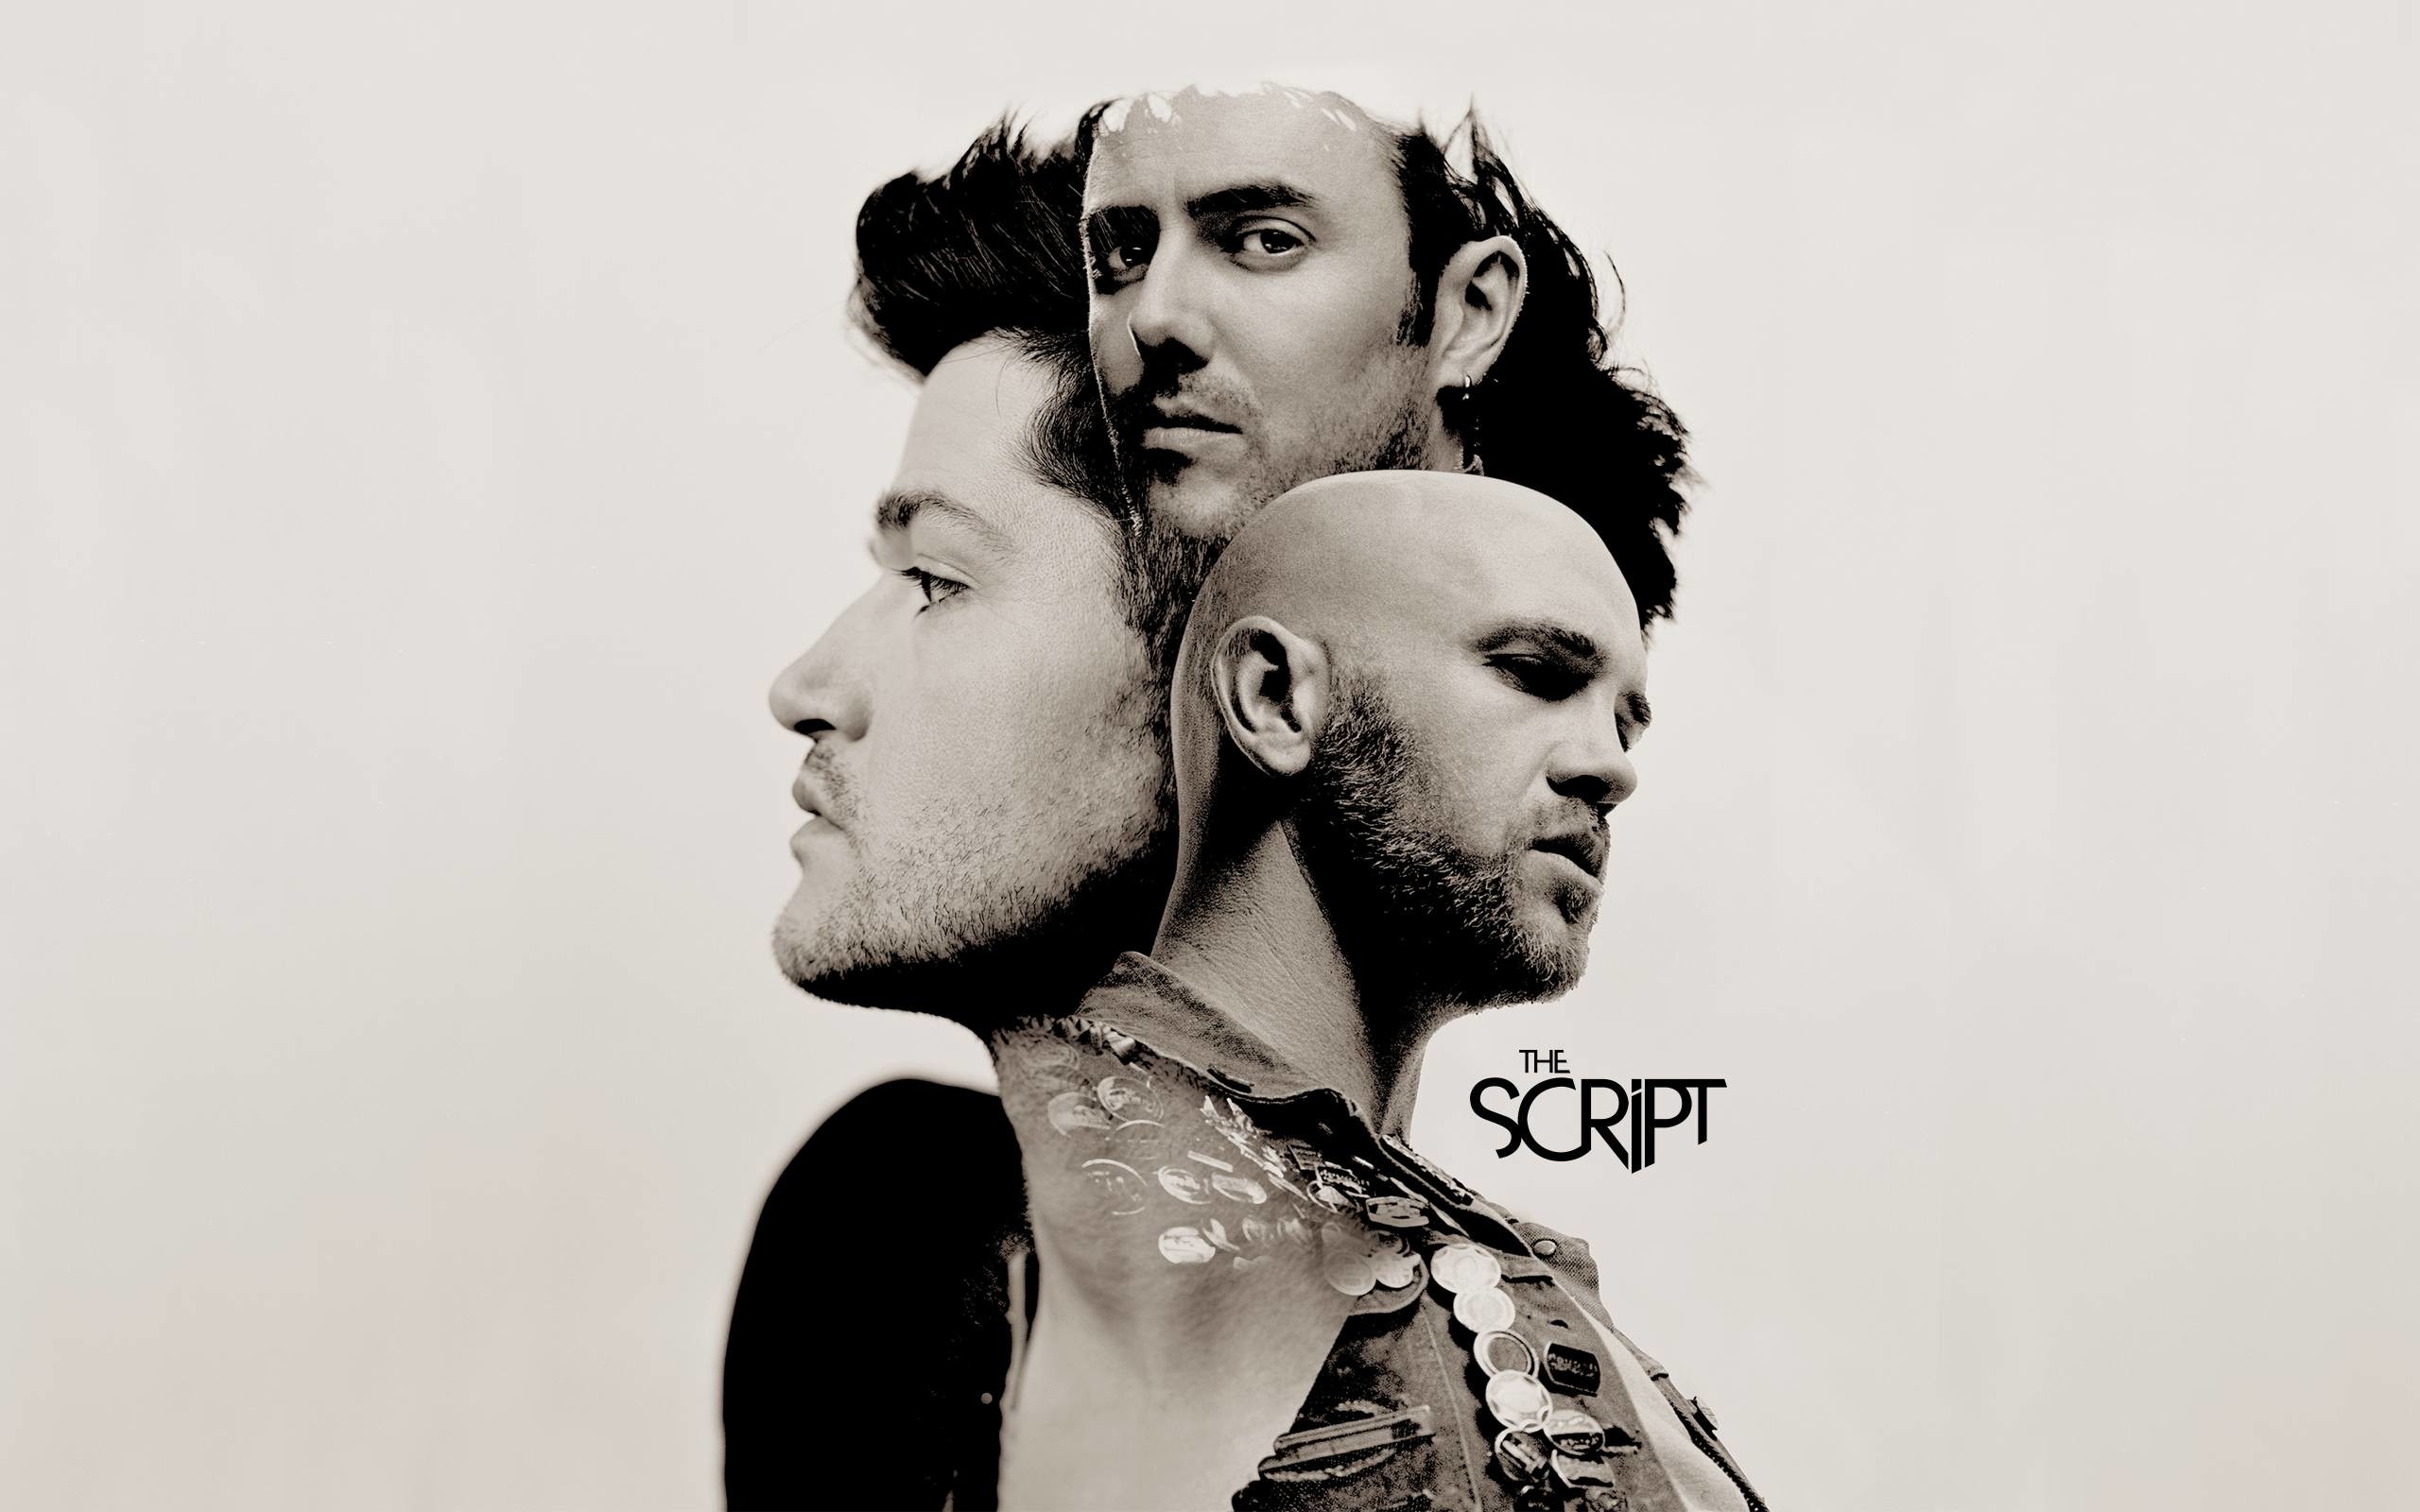 The script if you could